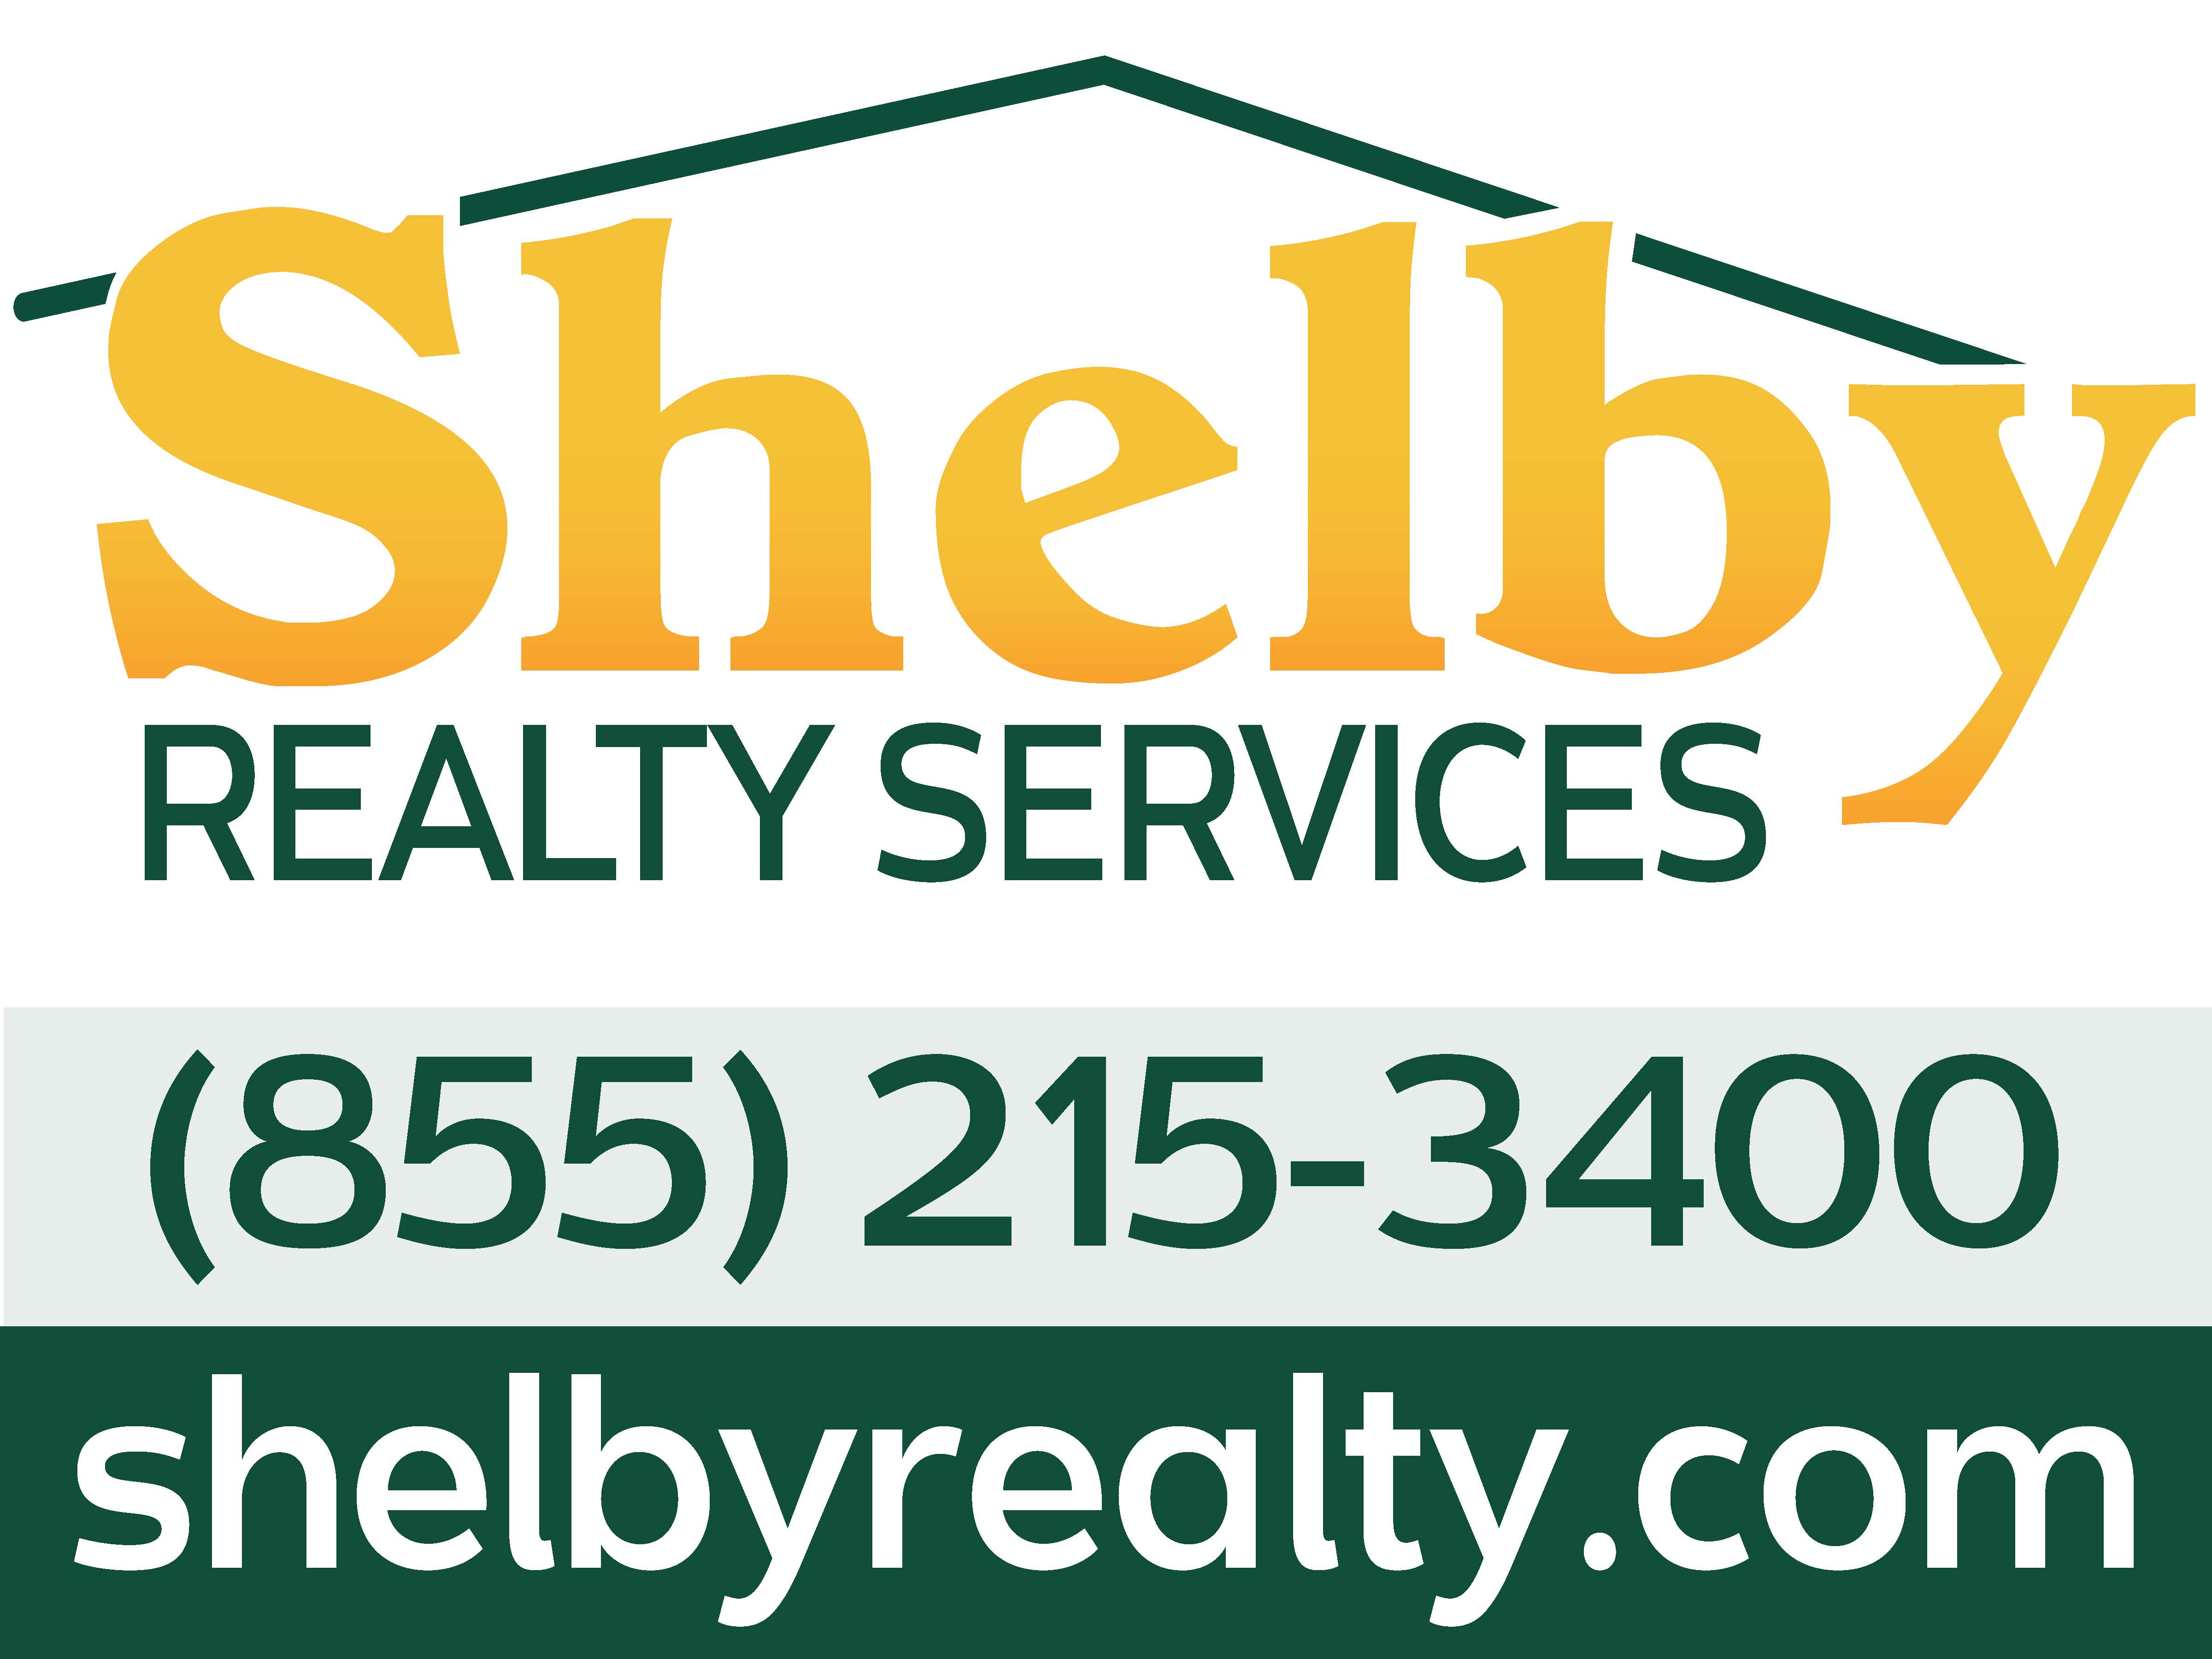 Shelby Realty Services Logo